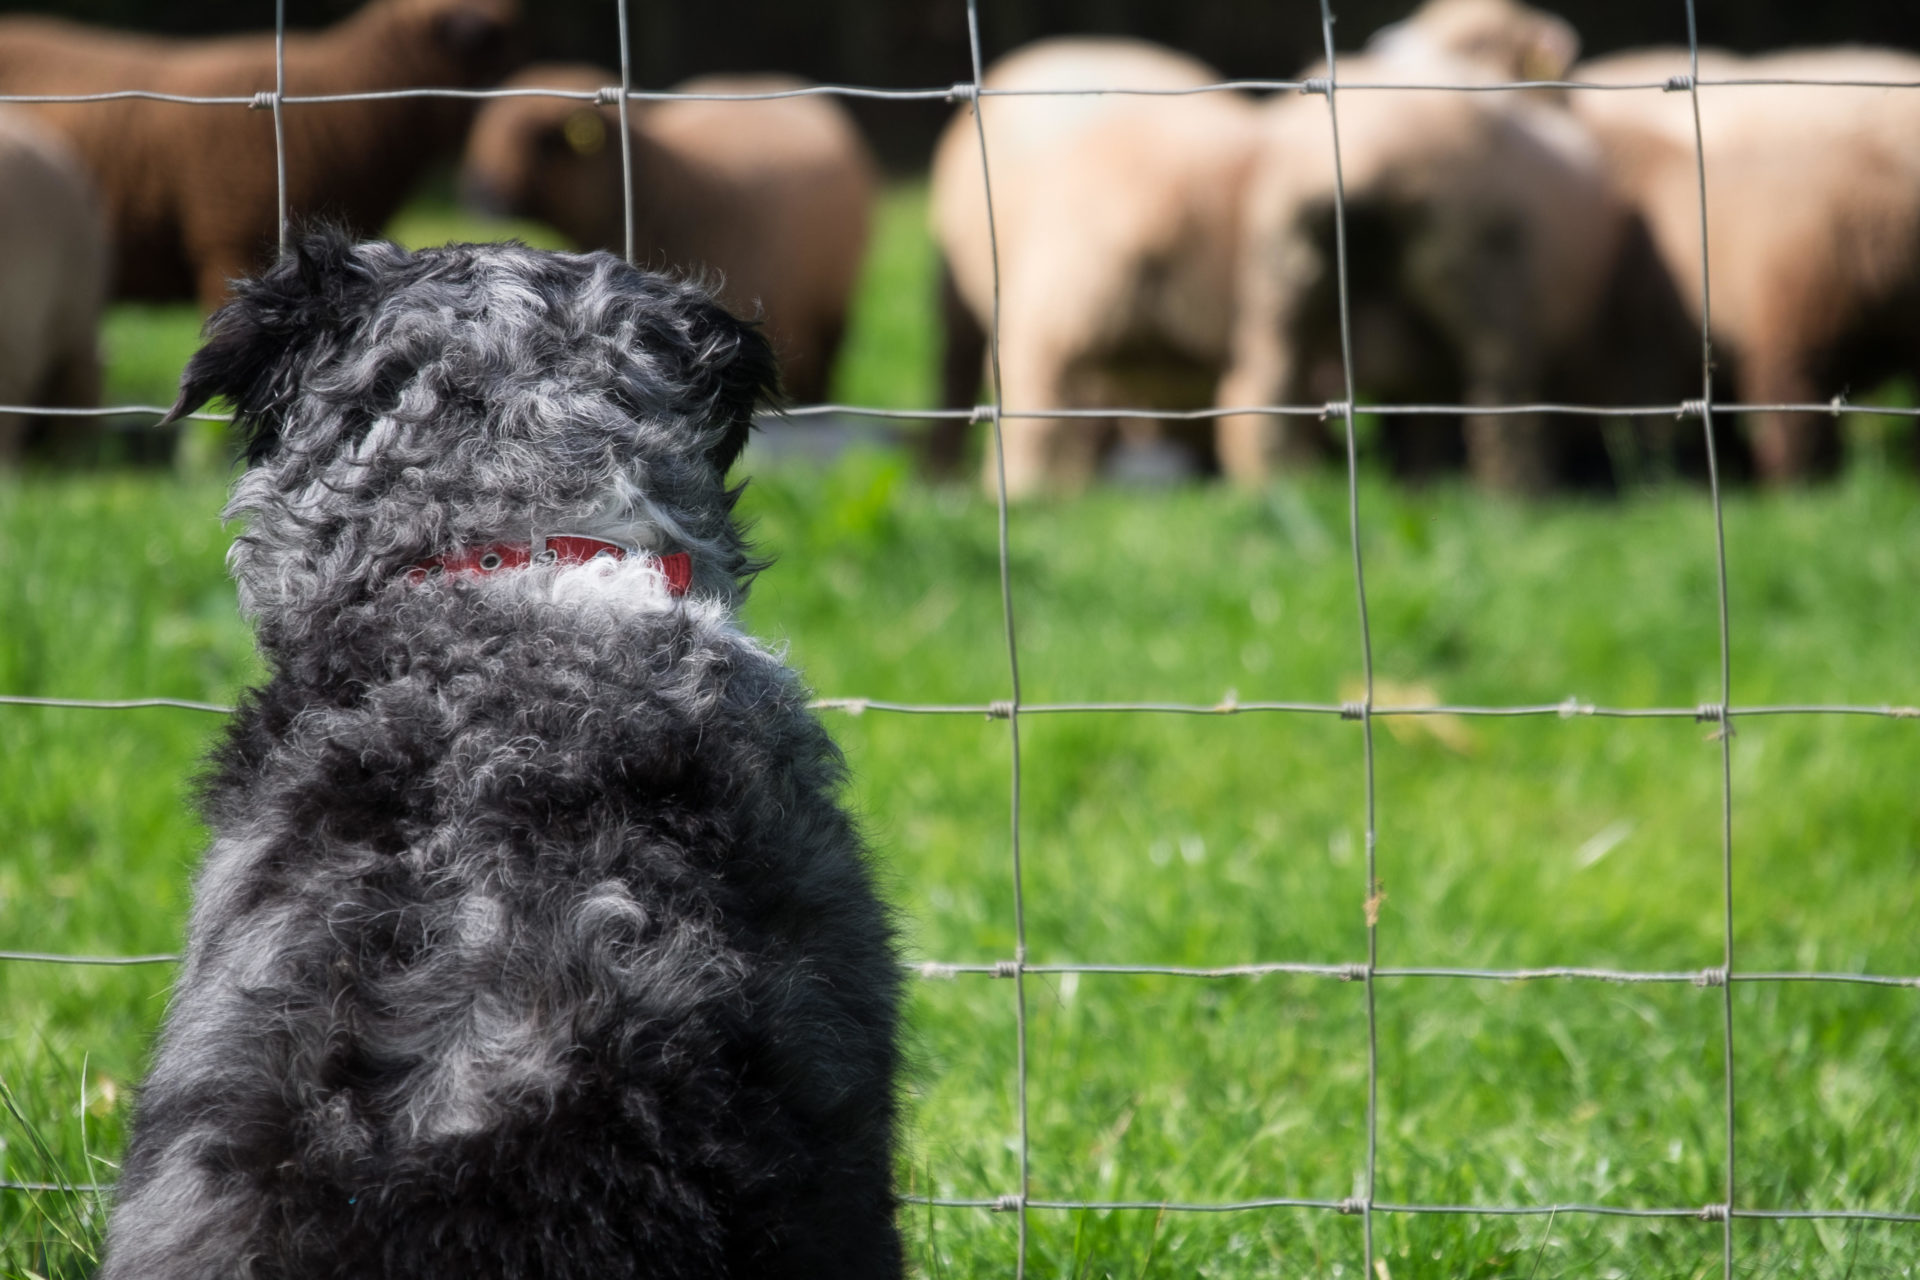 Main image shows a Sheepdog watching sheep from behind a wire fence.